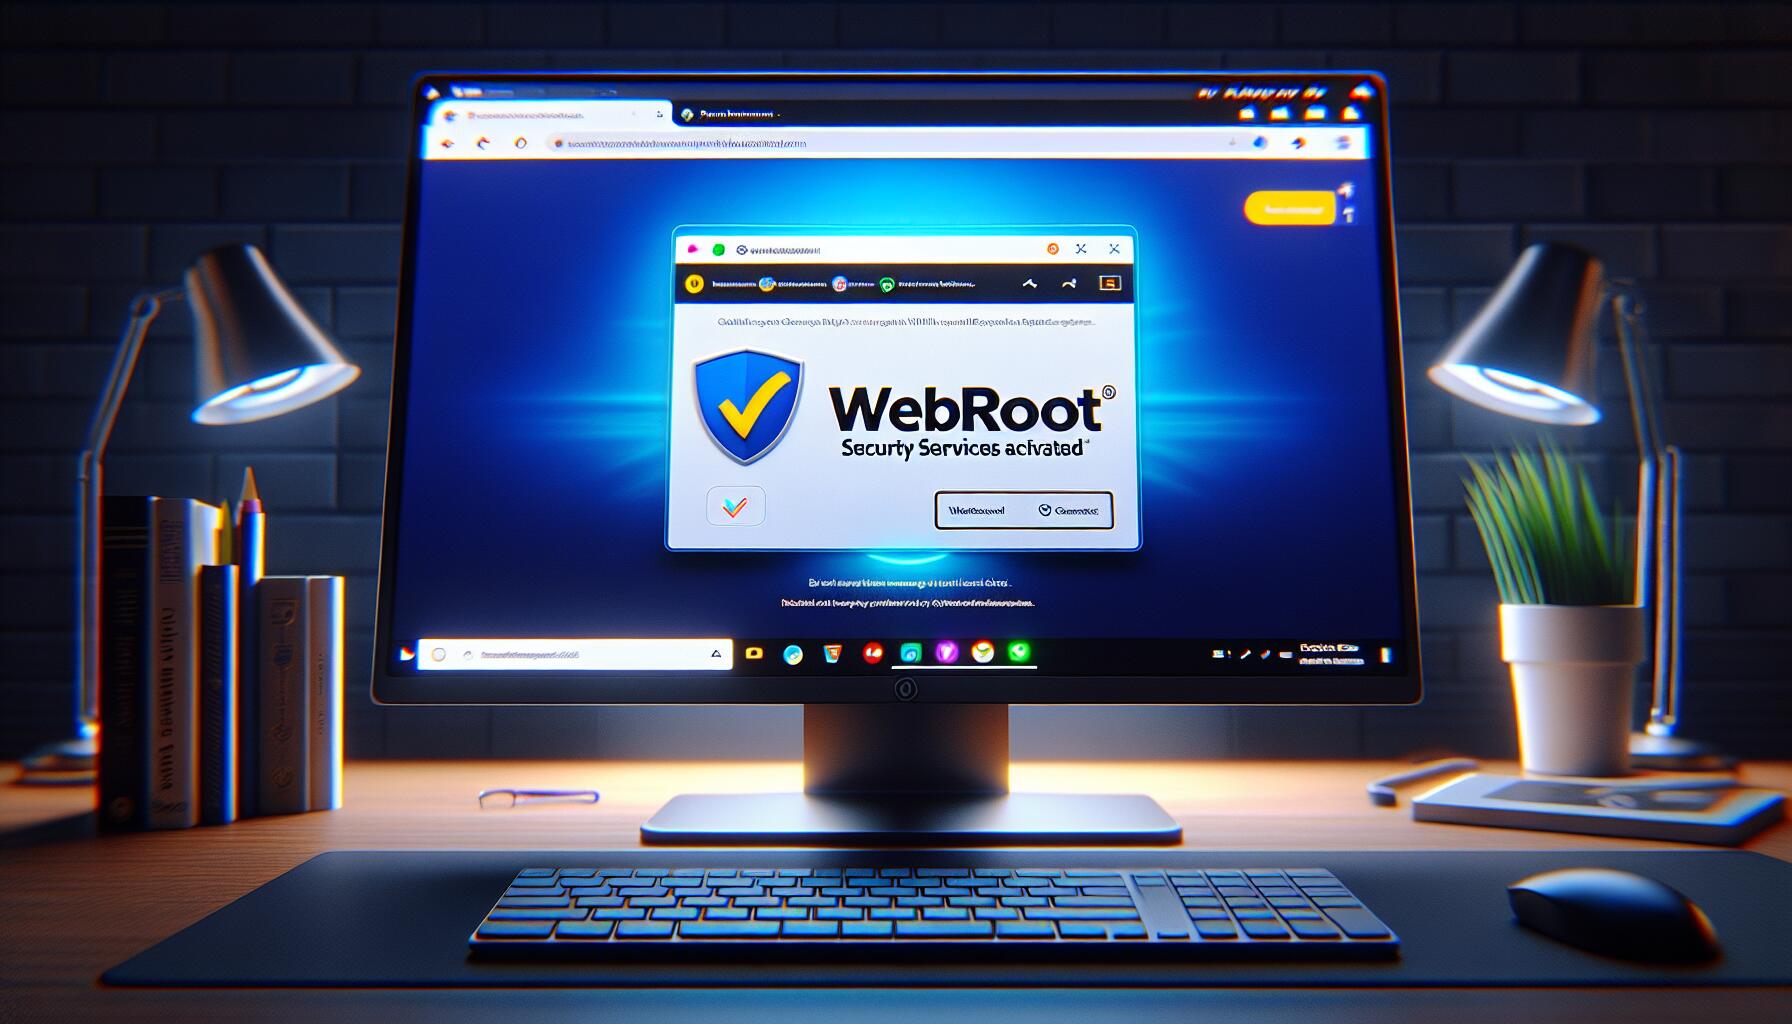 webroot security services activated ads